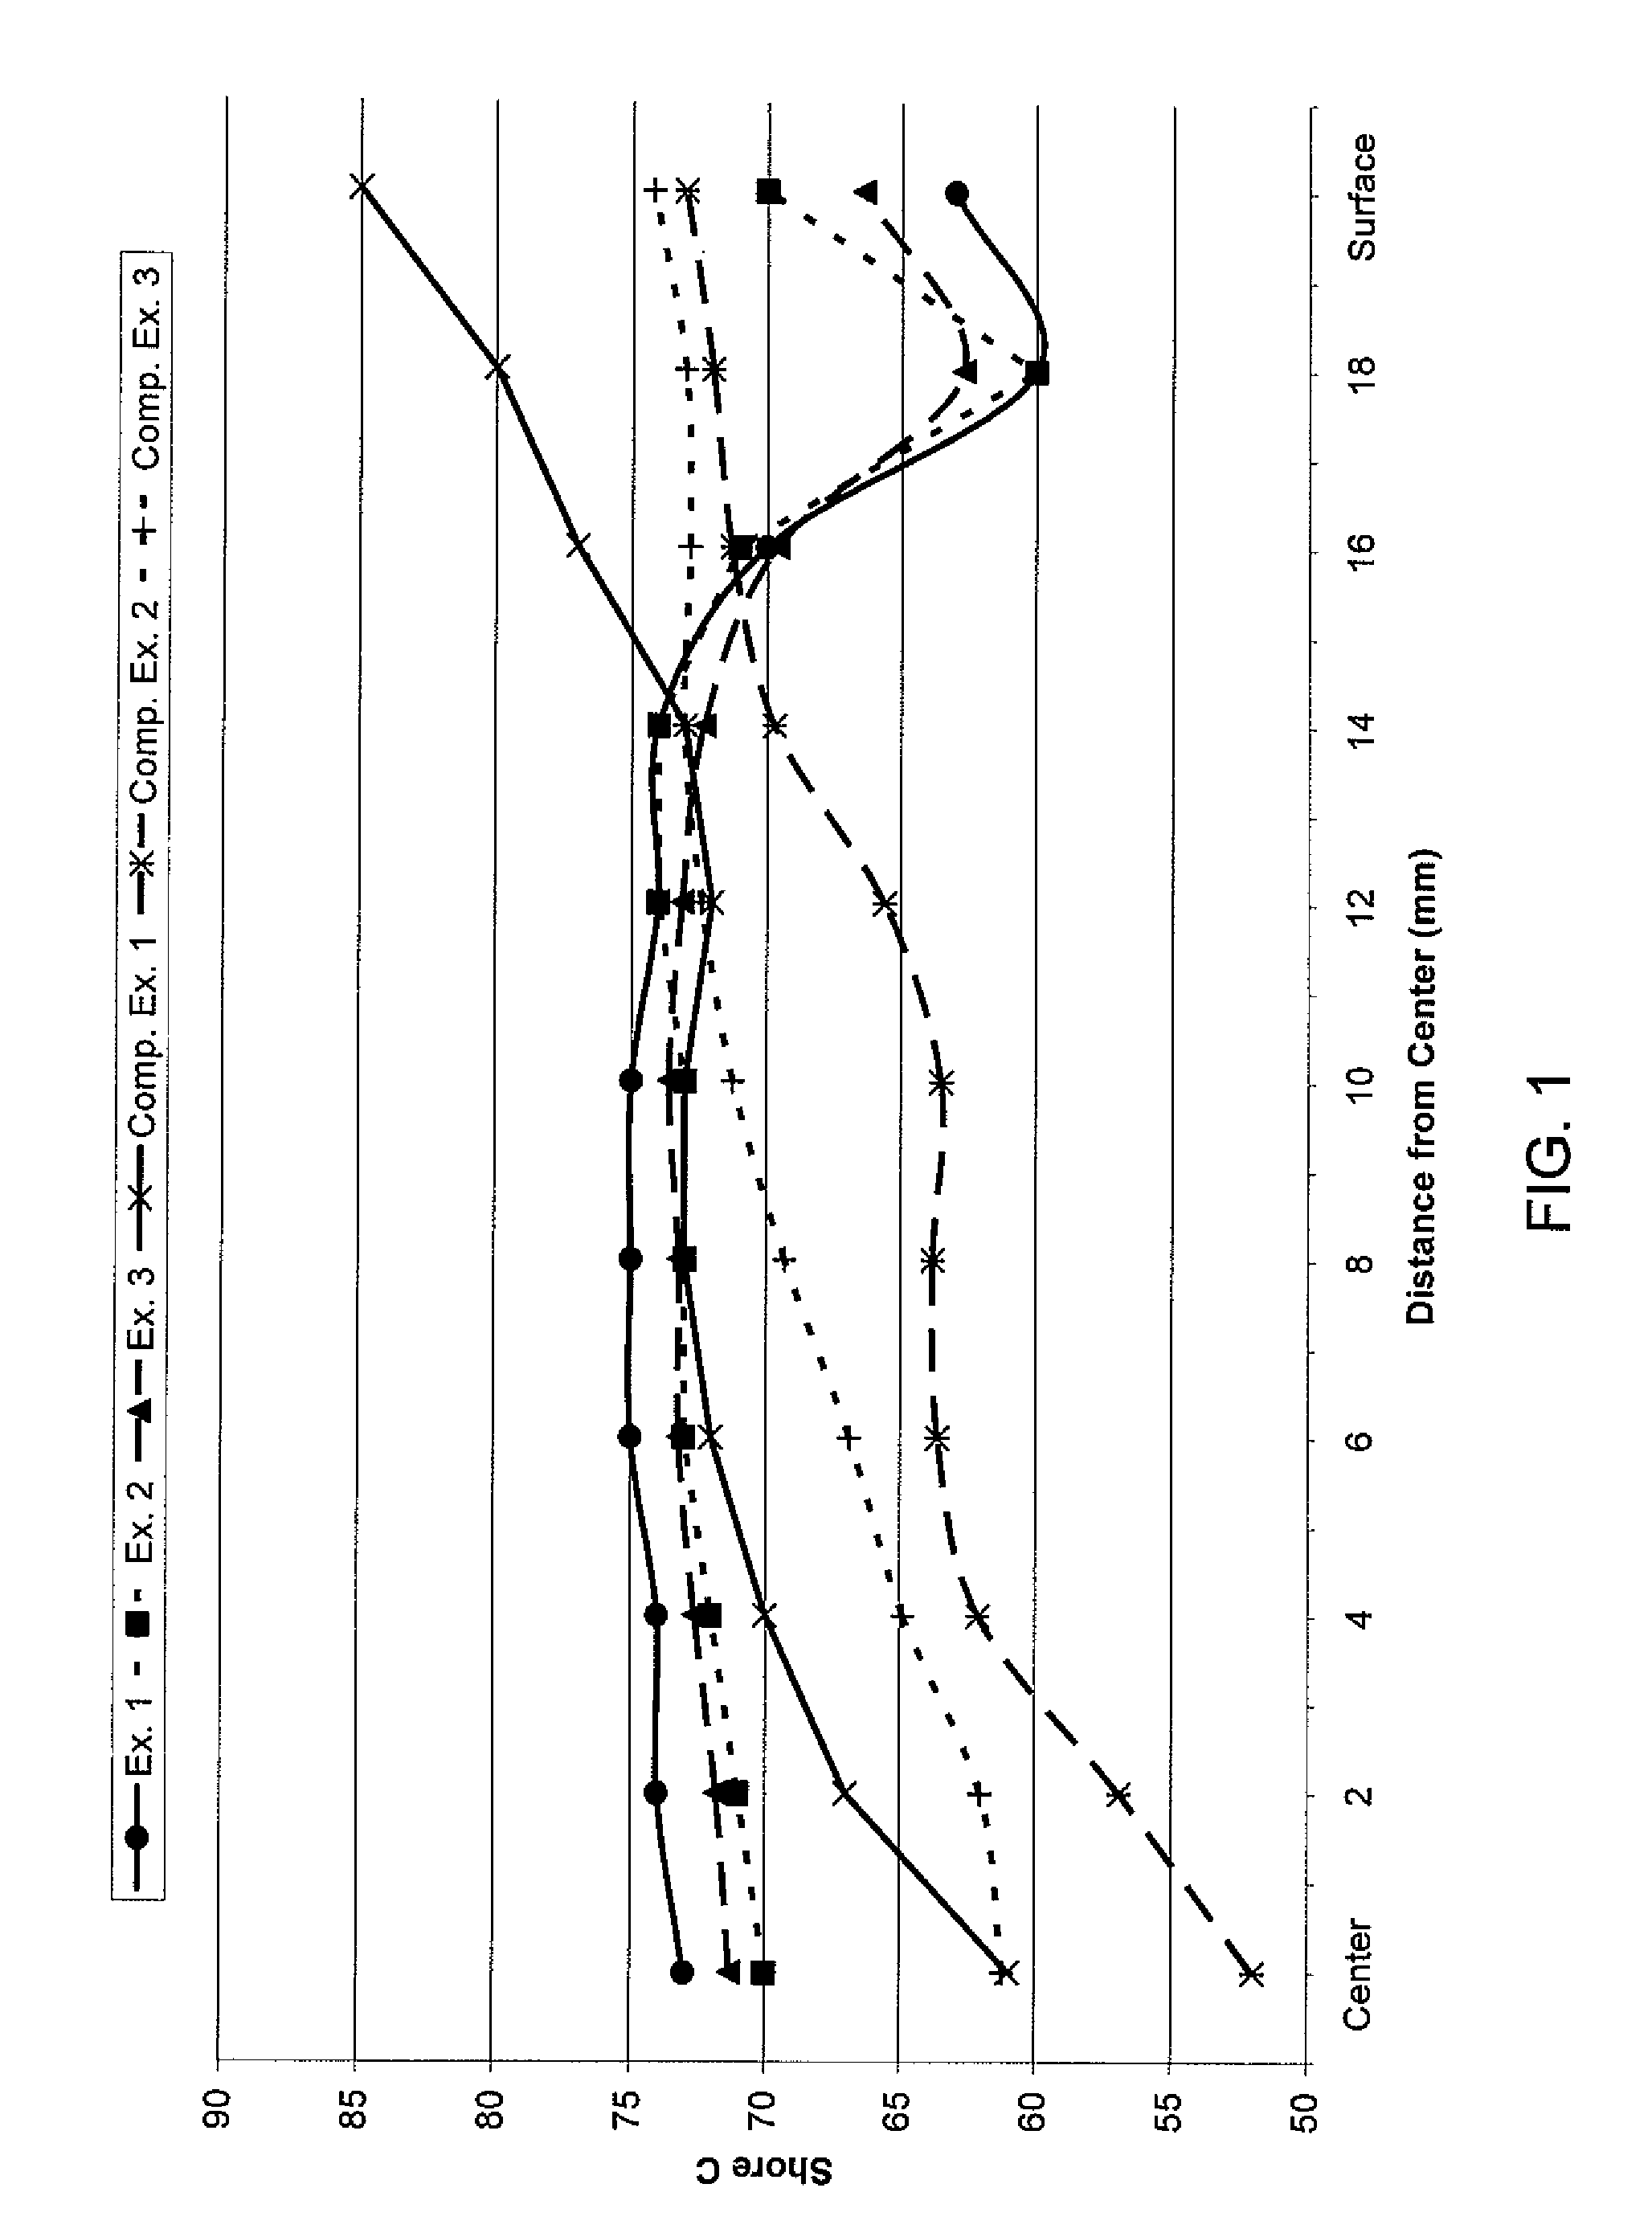 Golf ball with negative hardness gradient core